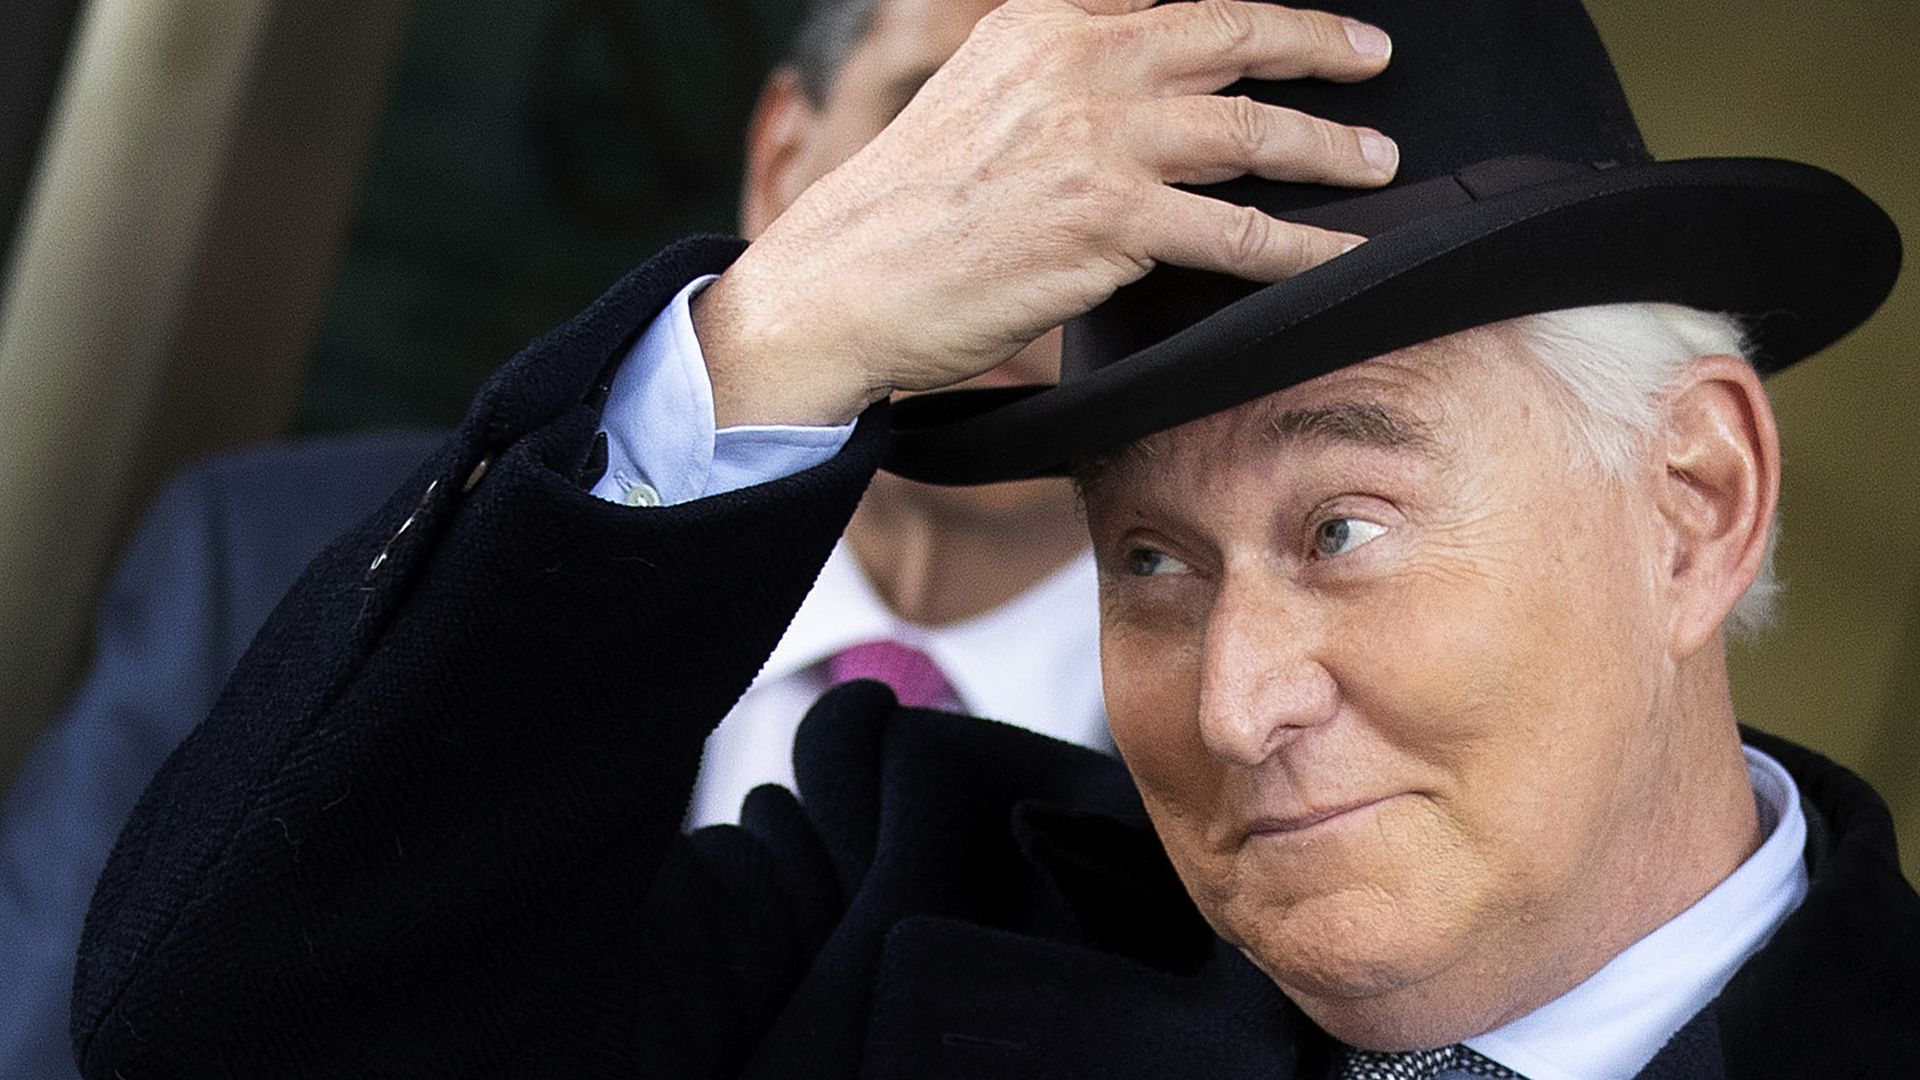 Roger Stone, former adviser and confidante to U.S. President Donald Trump, leaves the Federal District Court for the District of Columbia after being sentenced February 20, 2020 in Washington, DC. 